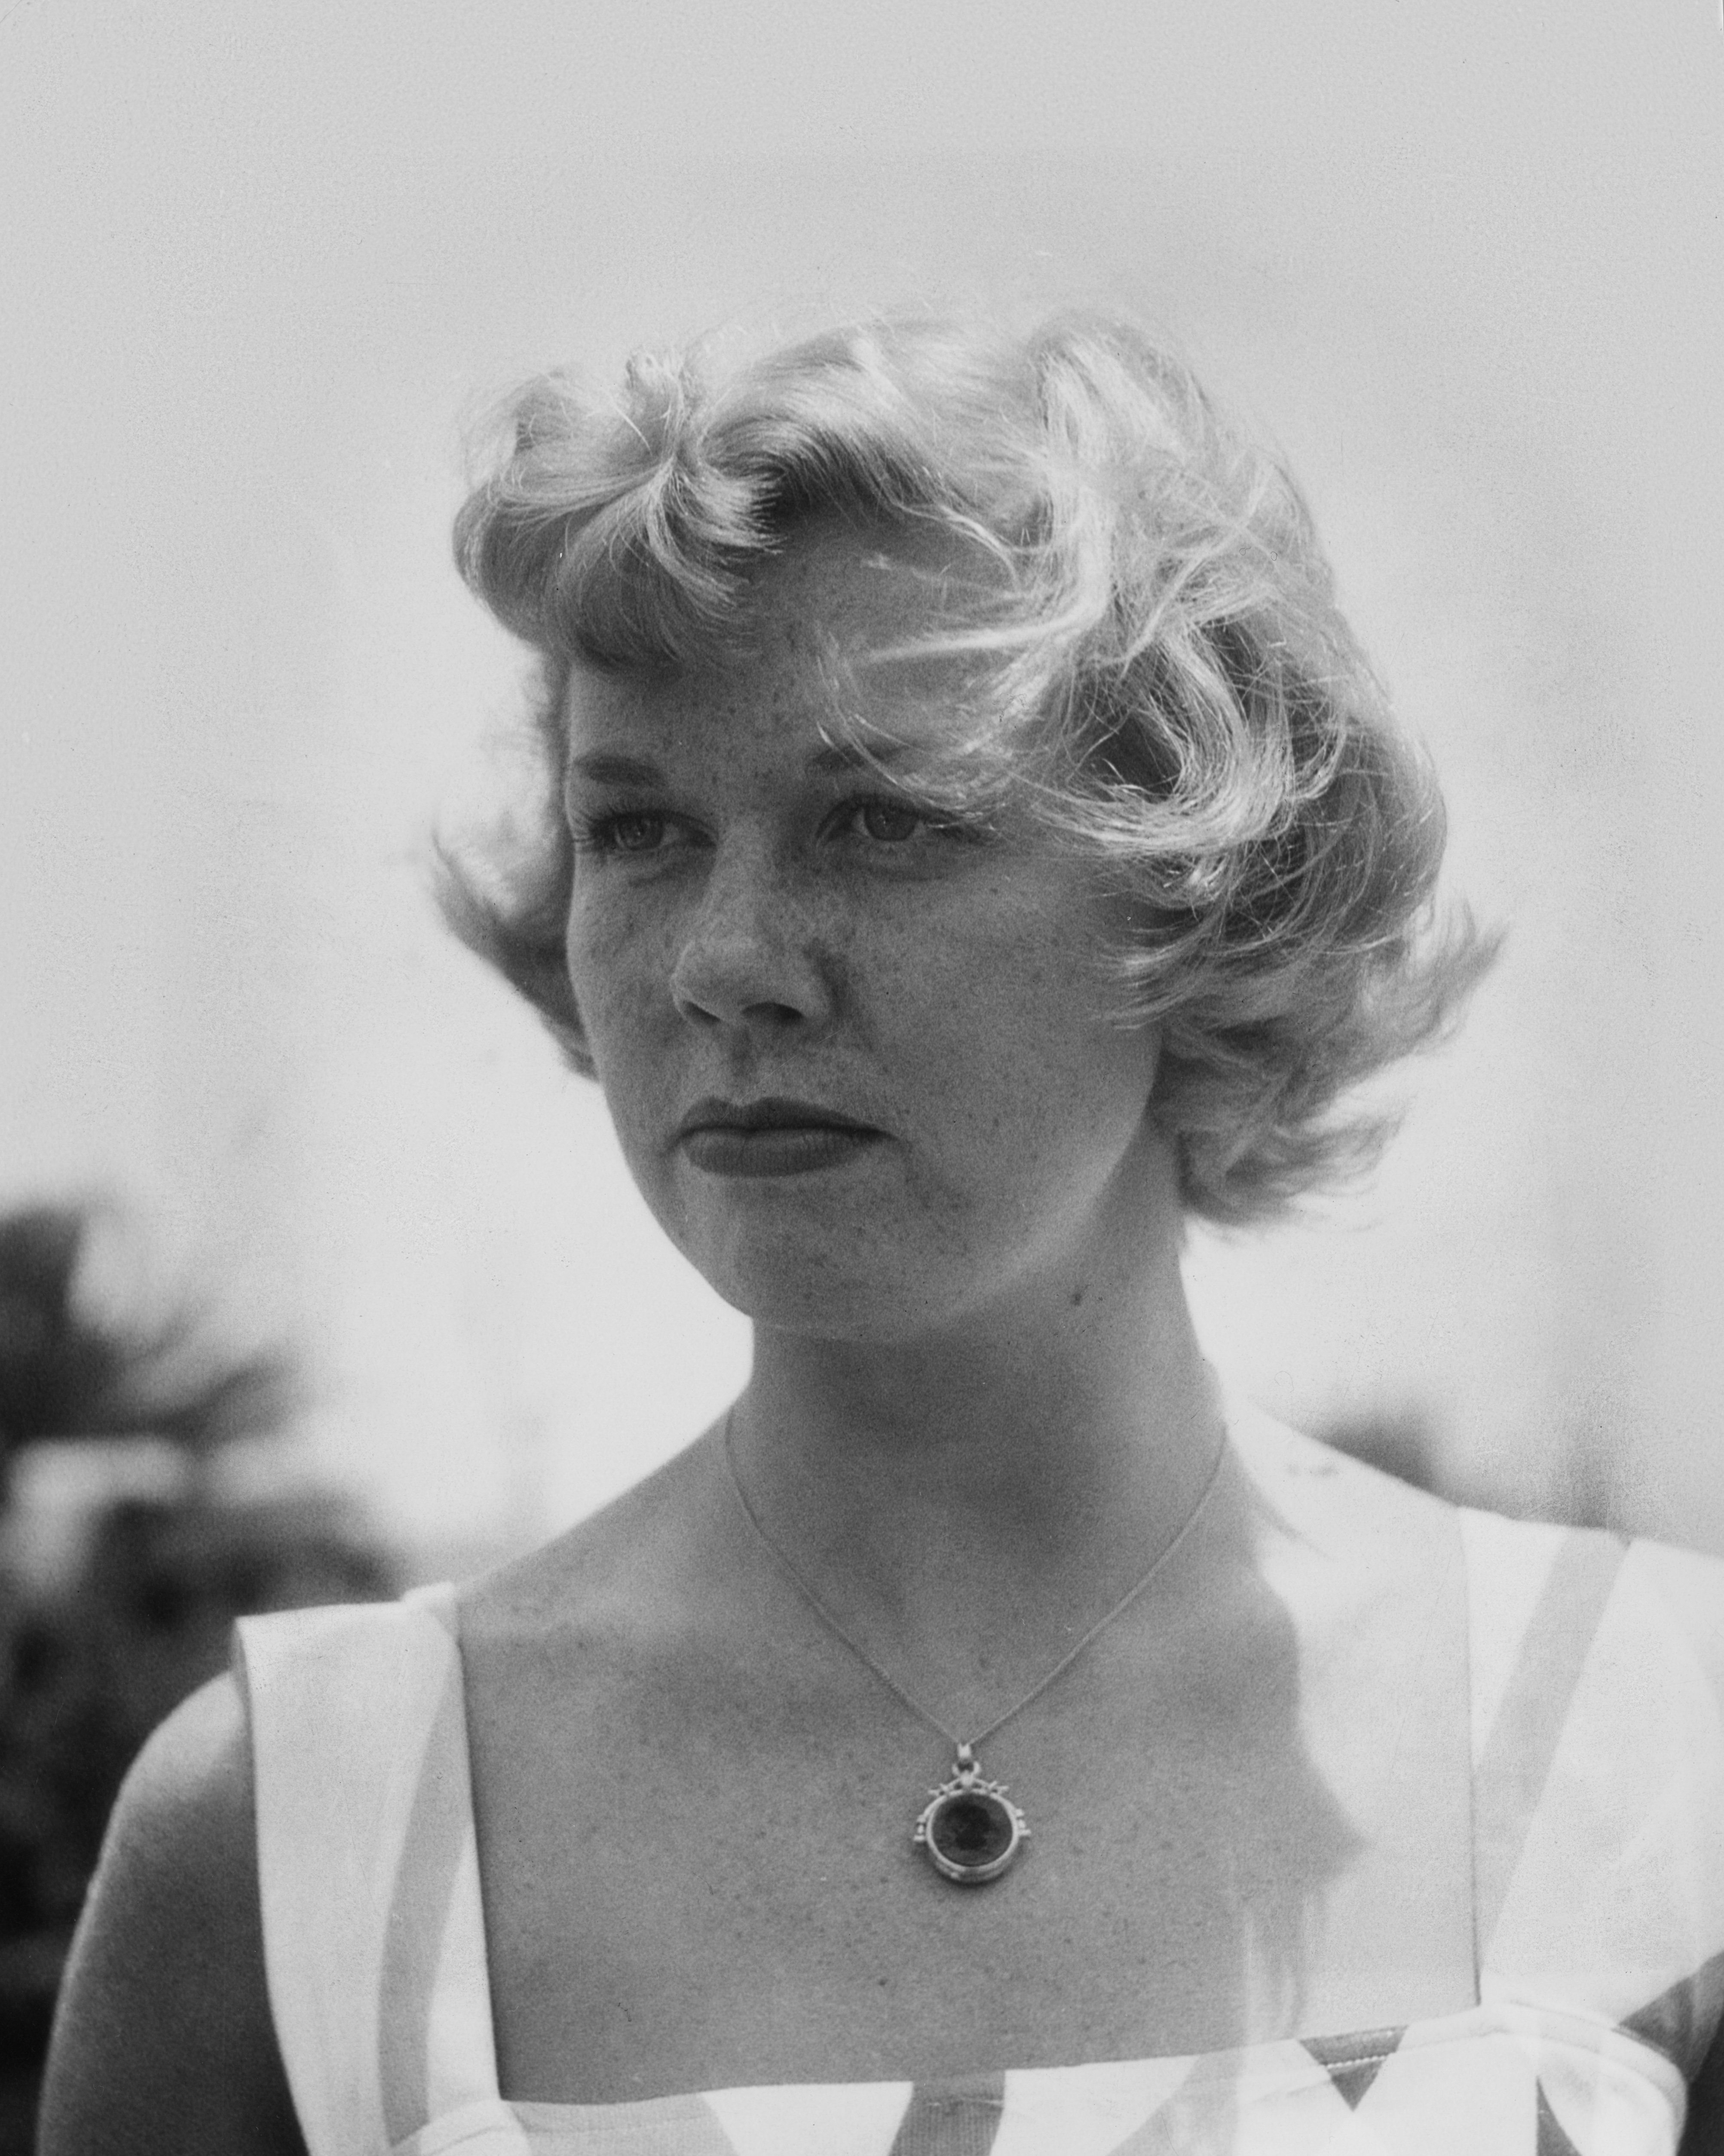 Doris Day pictured looking sad with her curled up blonde short hair in 1949. / Source: Getty Images